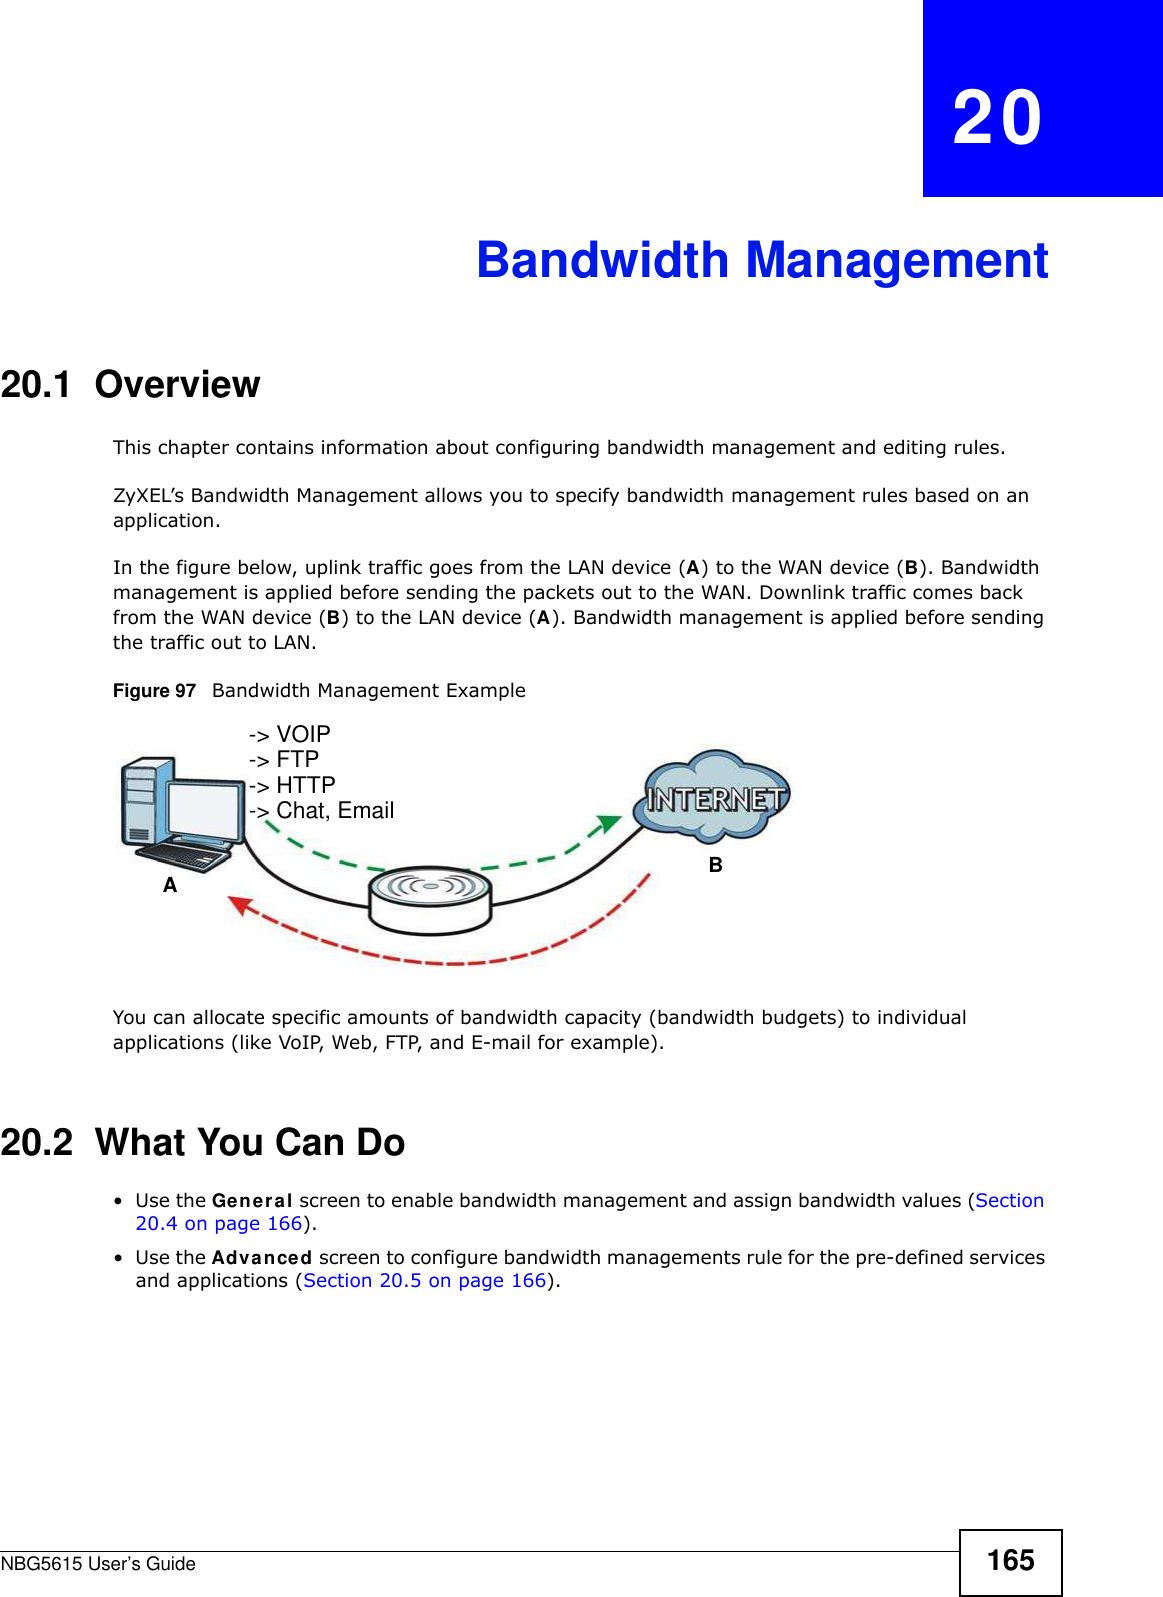 NBG5615 User’s Guide 165CHAPTER   20Bandwidth Management20.1  Overview This chapter contains information about configuring bandwidth management and editing rules.ZyXEL’s Bandwidth Management allows you to specify bandwidth management rules based on an application. In the figure below, uplink traffic goes from the LAN device (A) to the WAN device (B). Bandwidth management is applied before sending the packets out to the WAN. Downlink traffic comes back from the WAN device (B) to the LAN device (A). Bandwidth management is applied before sending the traffic out to LAN.Figure 97   Bandwidth Management ExampleYou can allocate specific amounts of bandwidth capacity (bandwidth budgets) to individual applications (like VoIP, Web, FTP, and E-mail for example).20.2  What You Can Do•Use the General screen to enable bandwidth management and assign bandwidth values (Section 20.4 on page 166).•Use the Advanced screen to configure bandwidth managements rule for the pre-defined services and applications (Section 20.5 on page 166).AB-&gt; VOIP-&gt; FTP-&gt; HTTP-&gt; Chat, Email